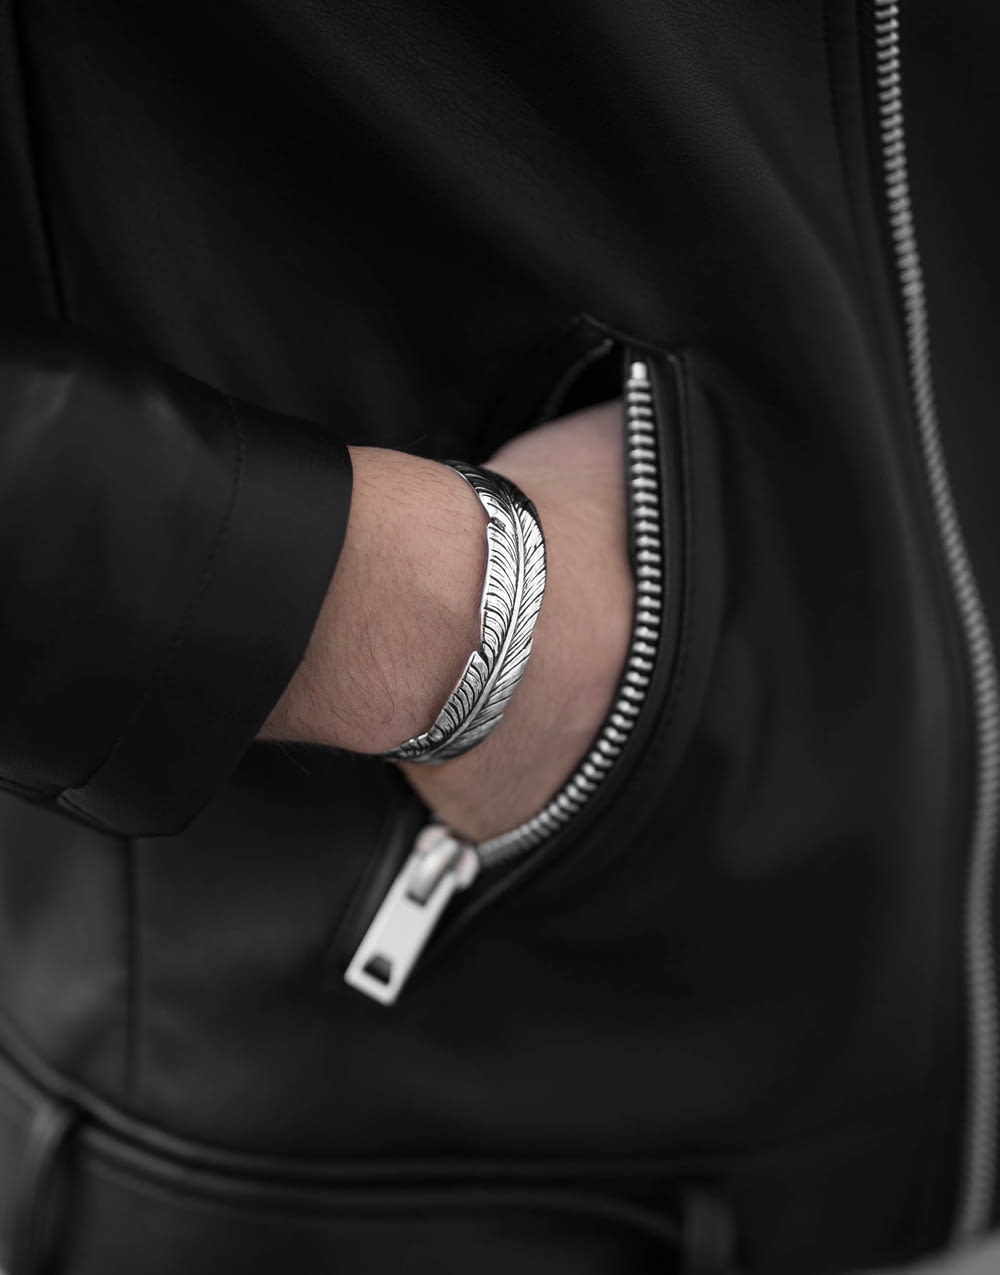 person wearing silver aluminum case apple watch with white sport band